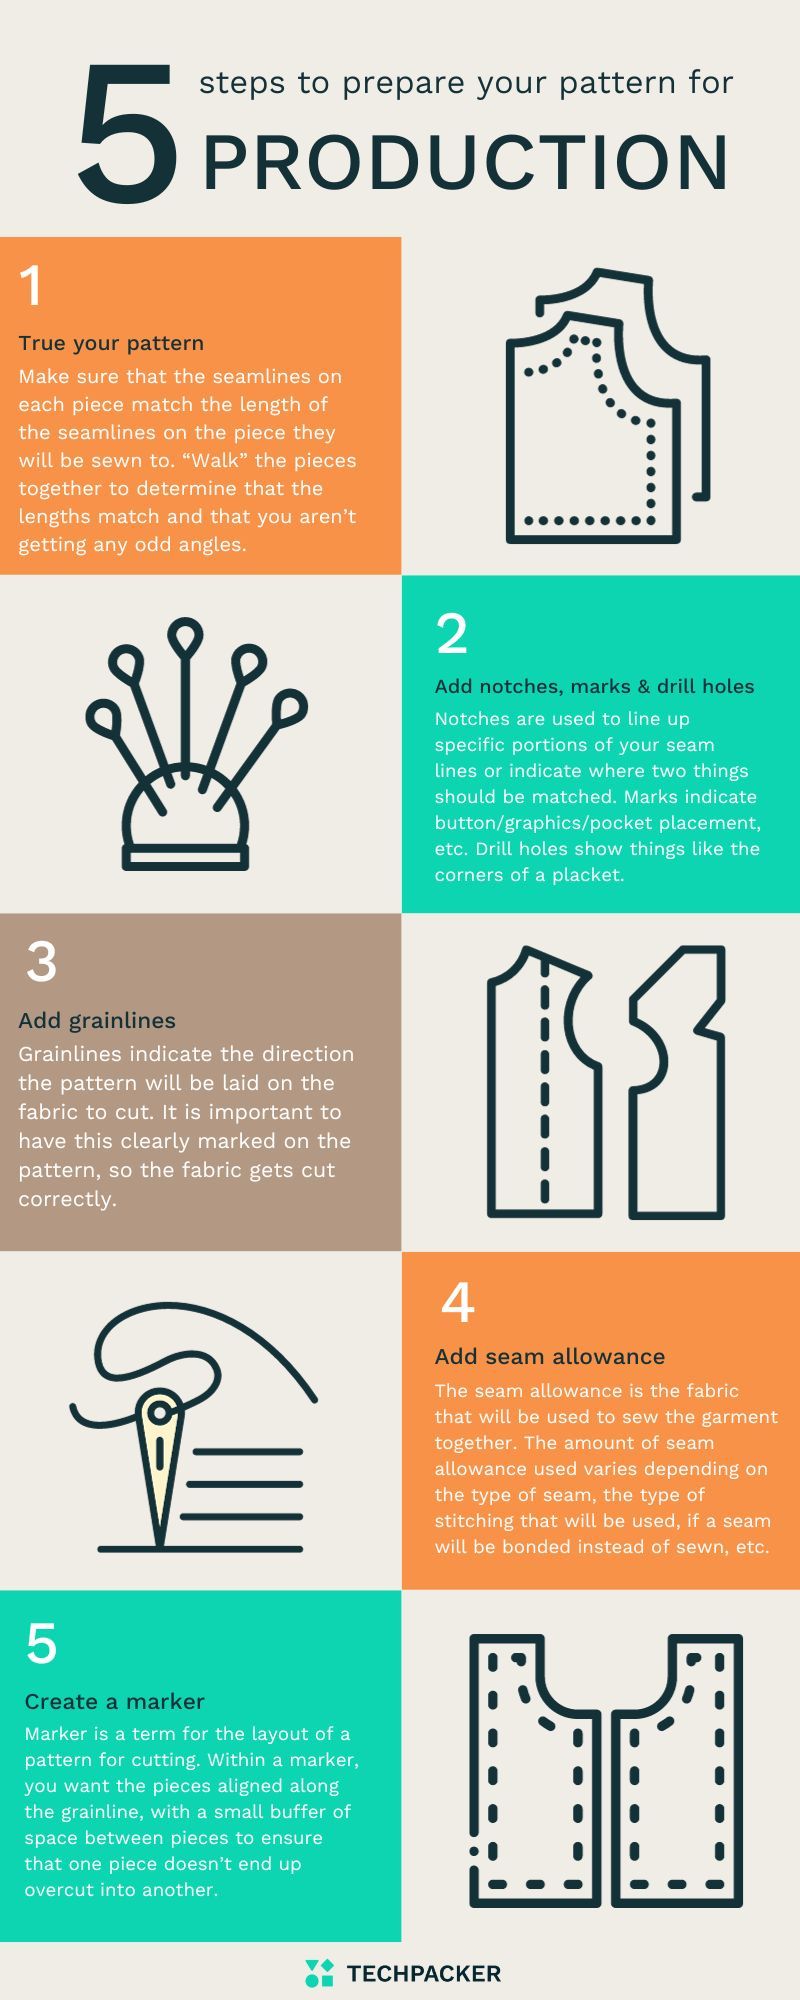 Infographic on 5 steps to prepare pattern for production